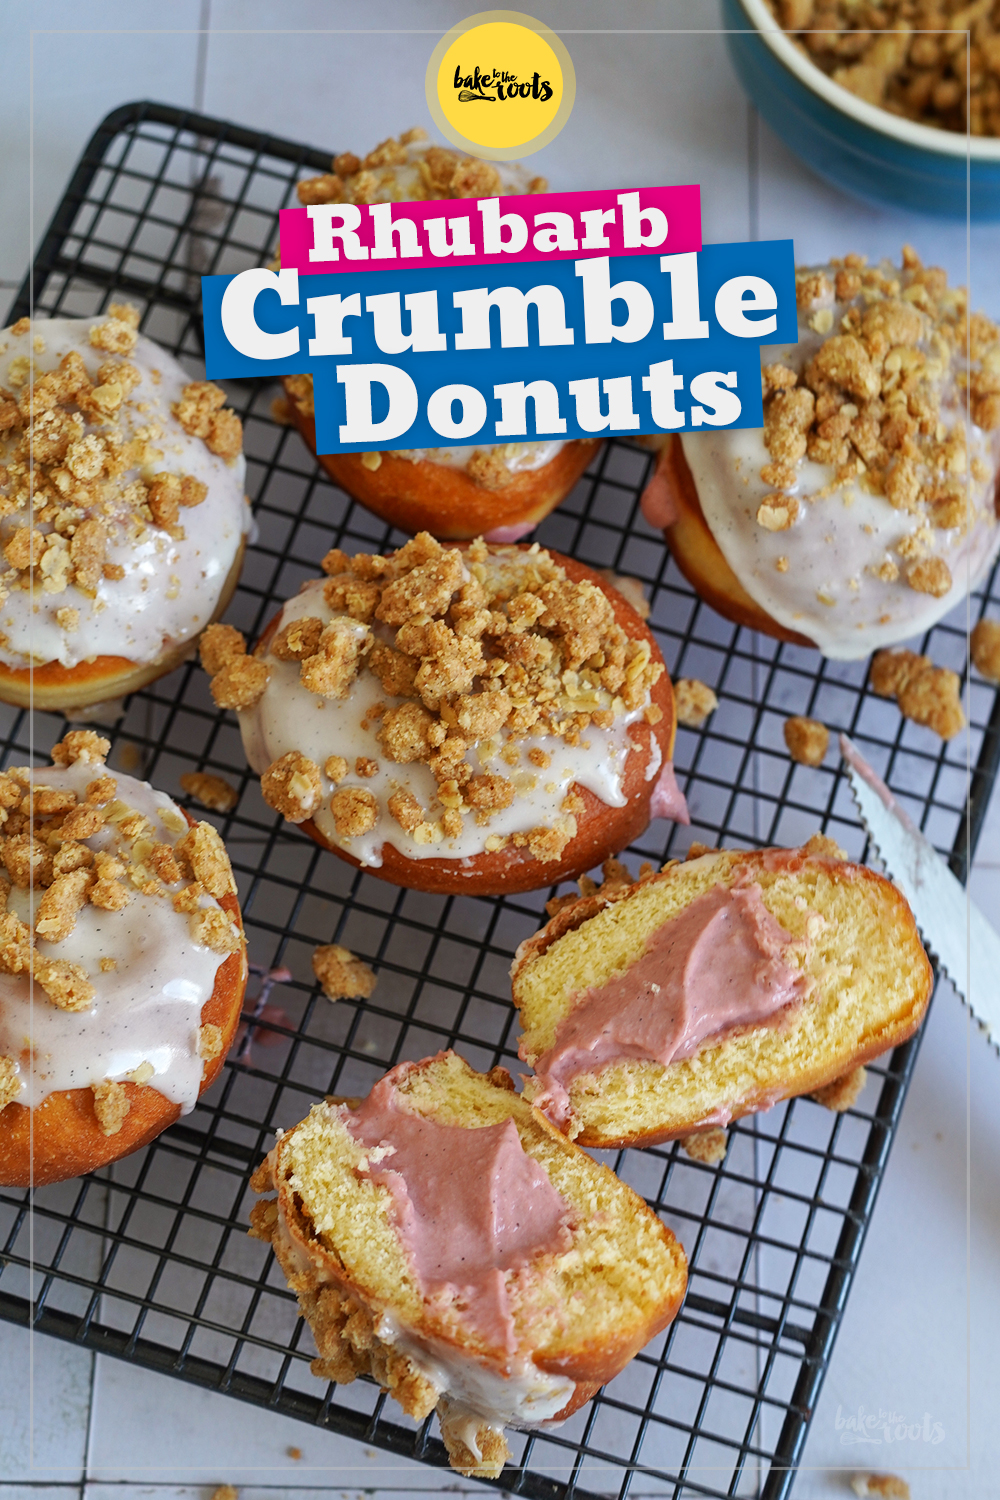 Rhabarber Streusel Donuts | Bake to the roots